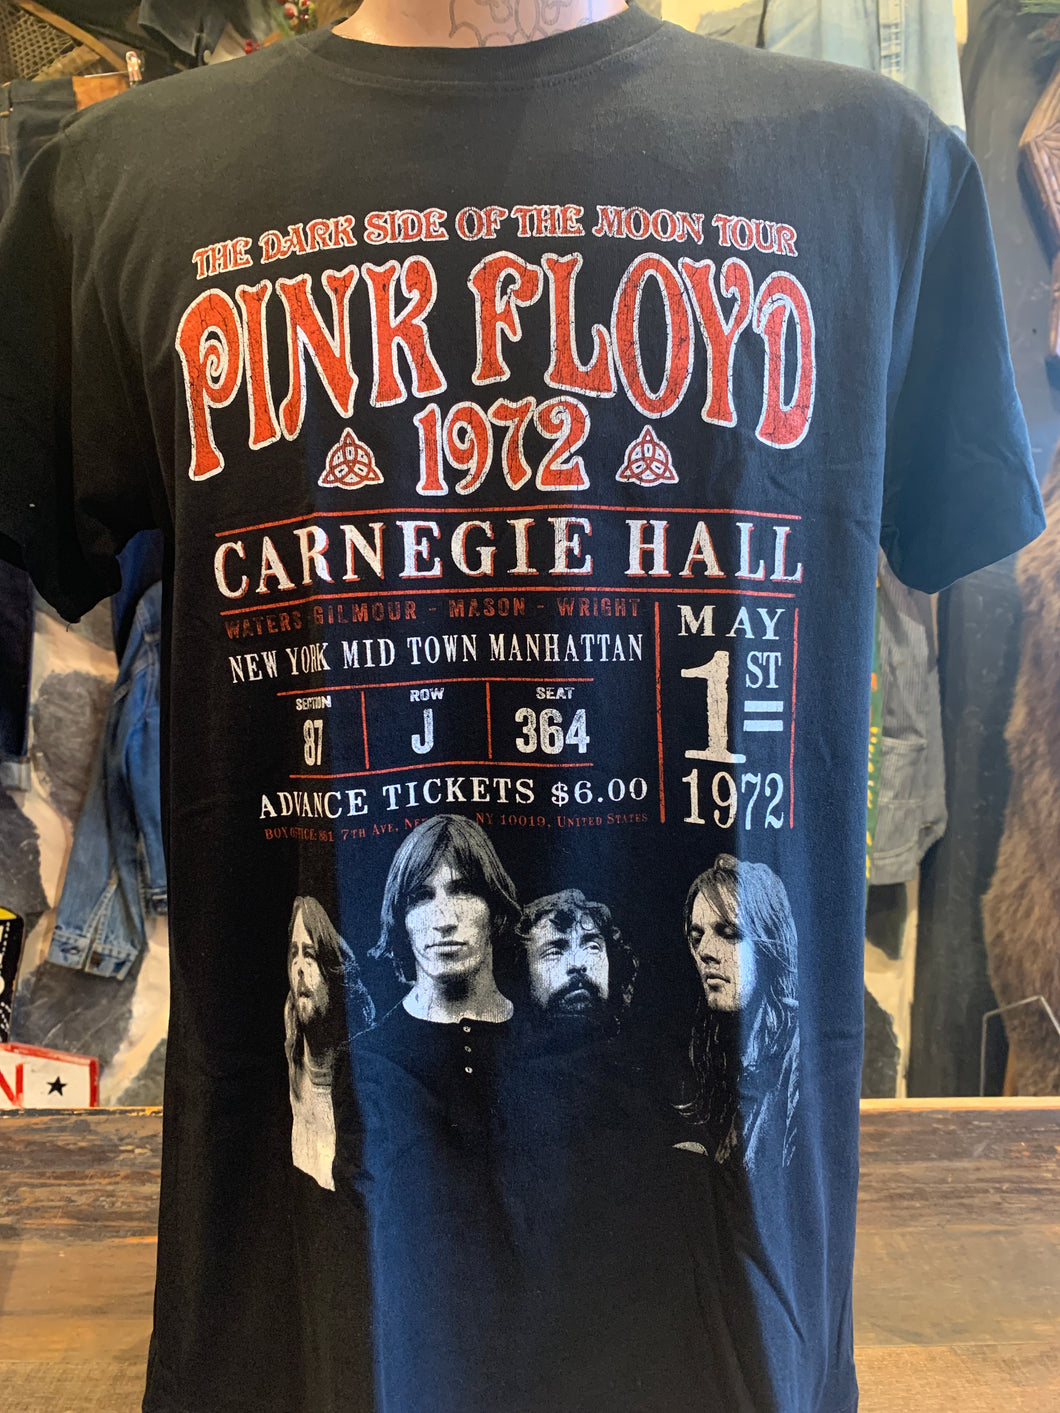 Pink Floyd 1972 Tour Poster Carnegie Hall May 1